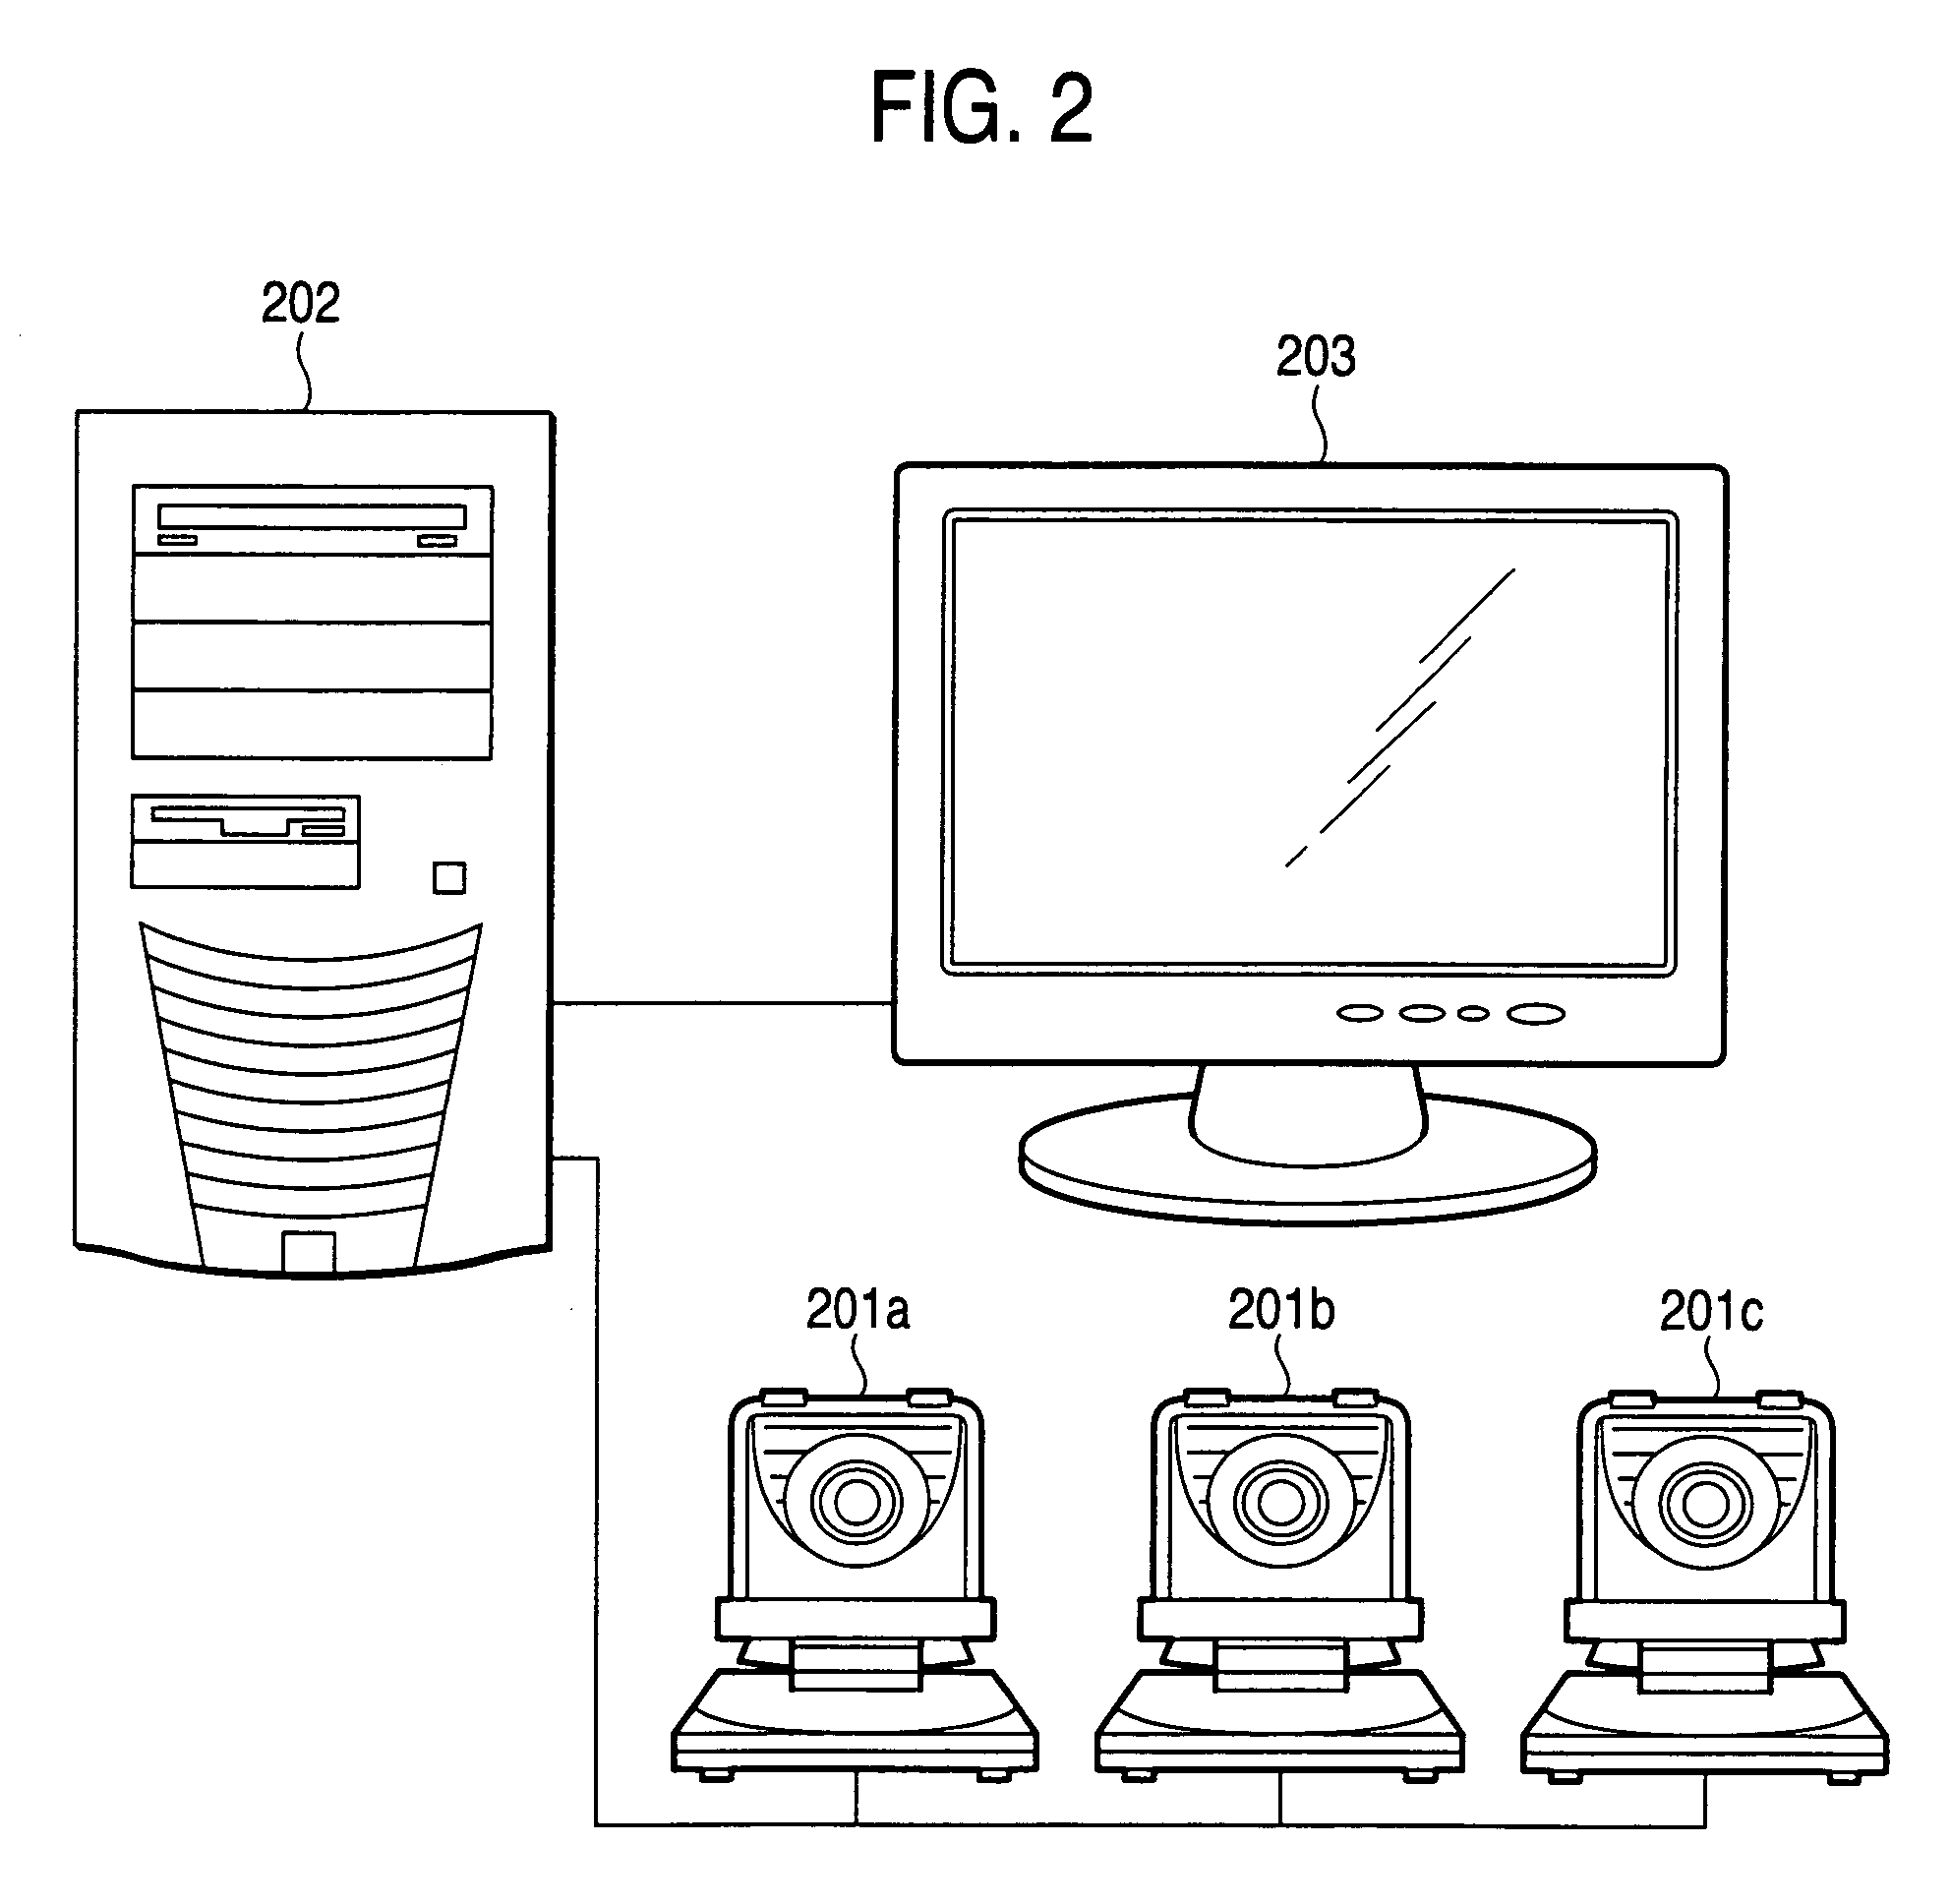 Face image processing apparatus and method